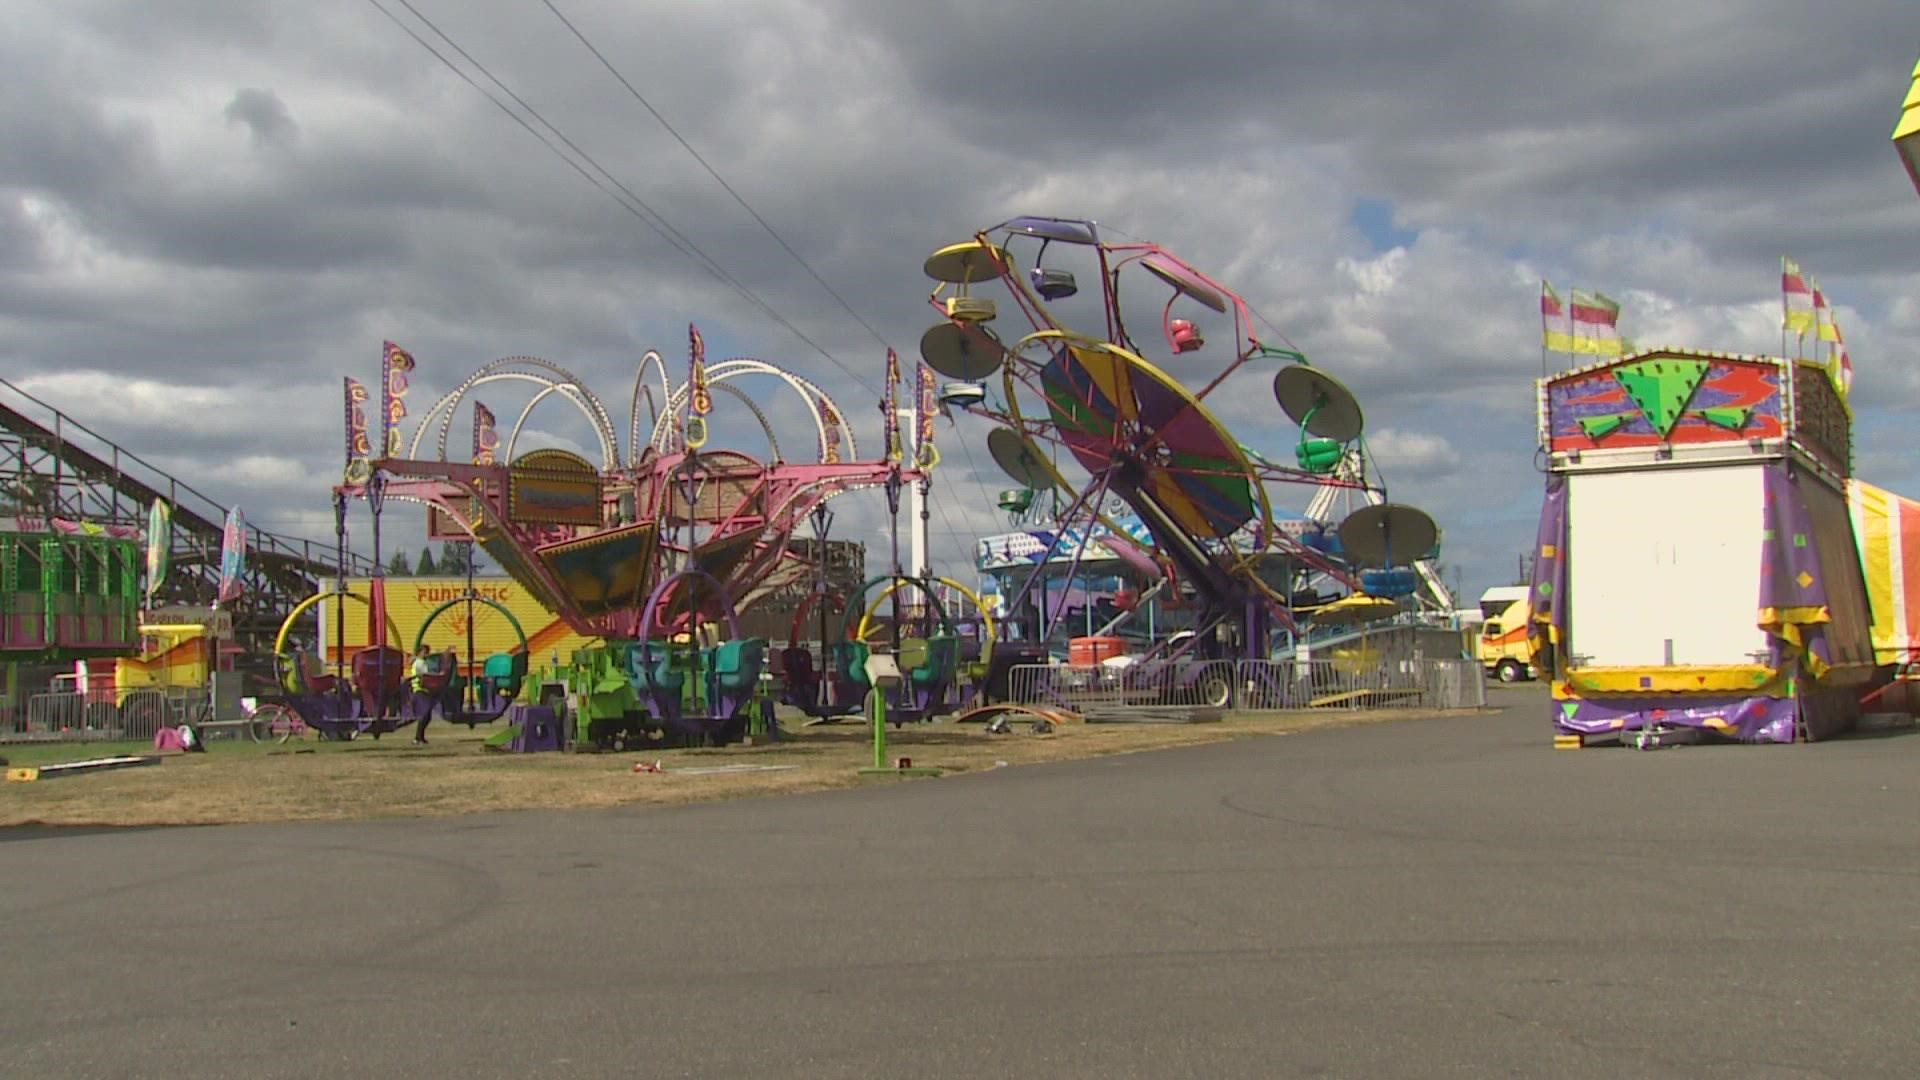 Washington State Fair guests will be required to wear masks at all times as Pierce County grapples with "unprecedented levels" of COVID-19.